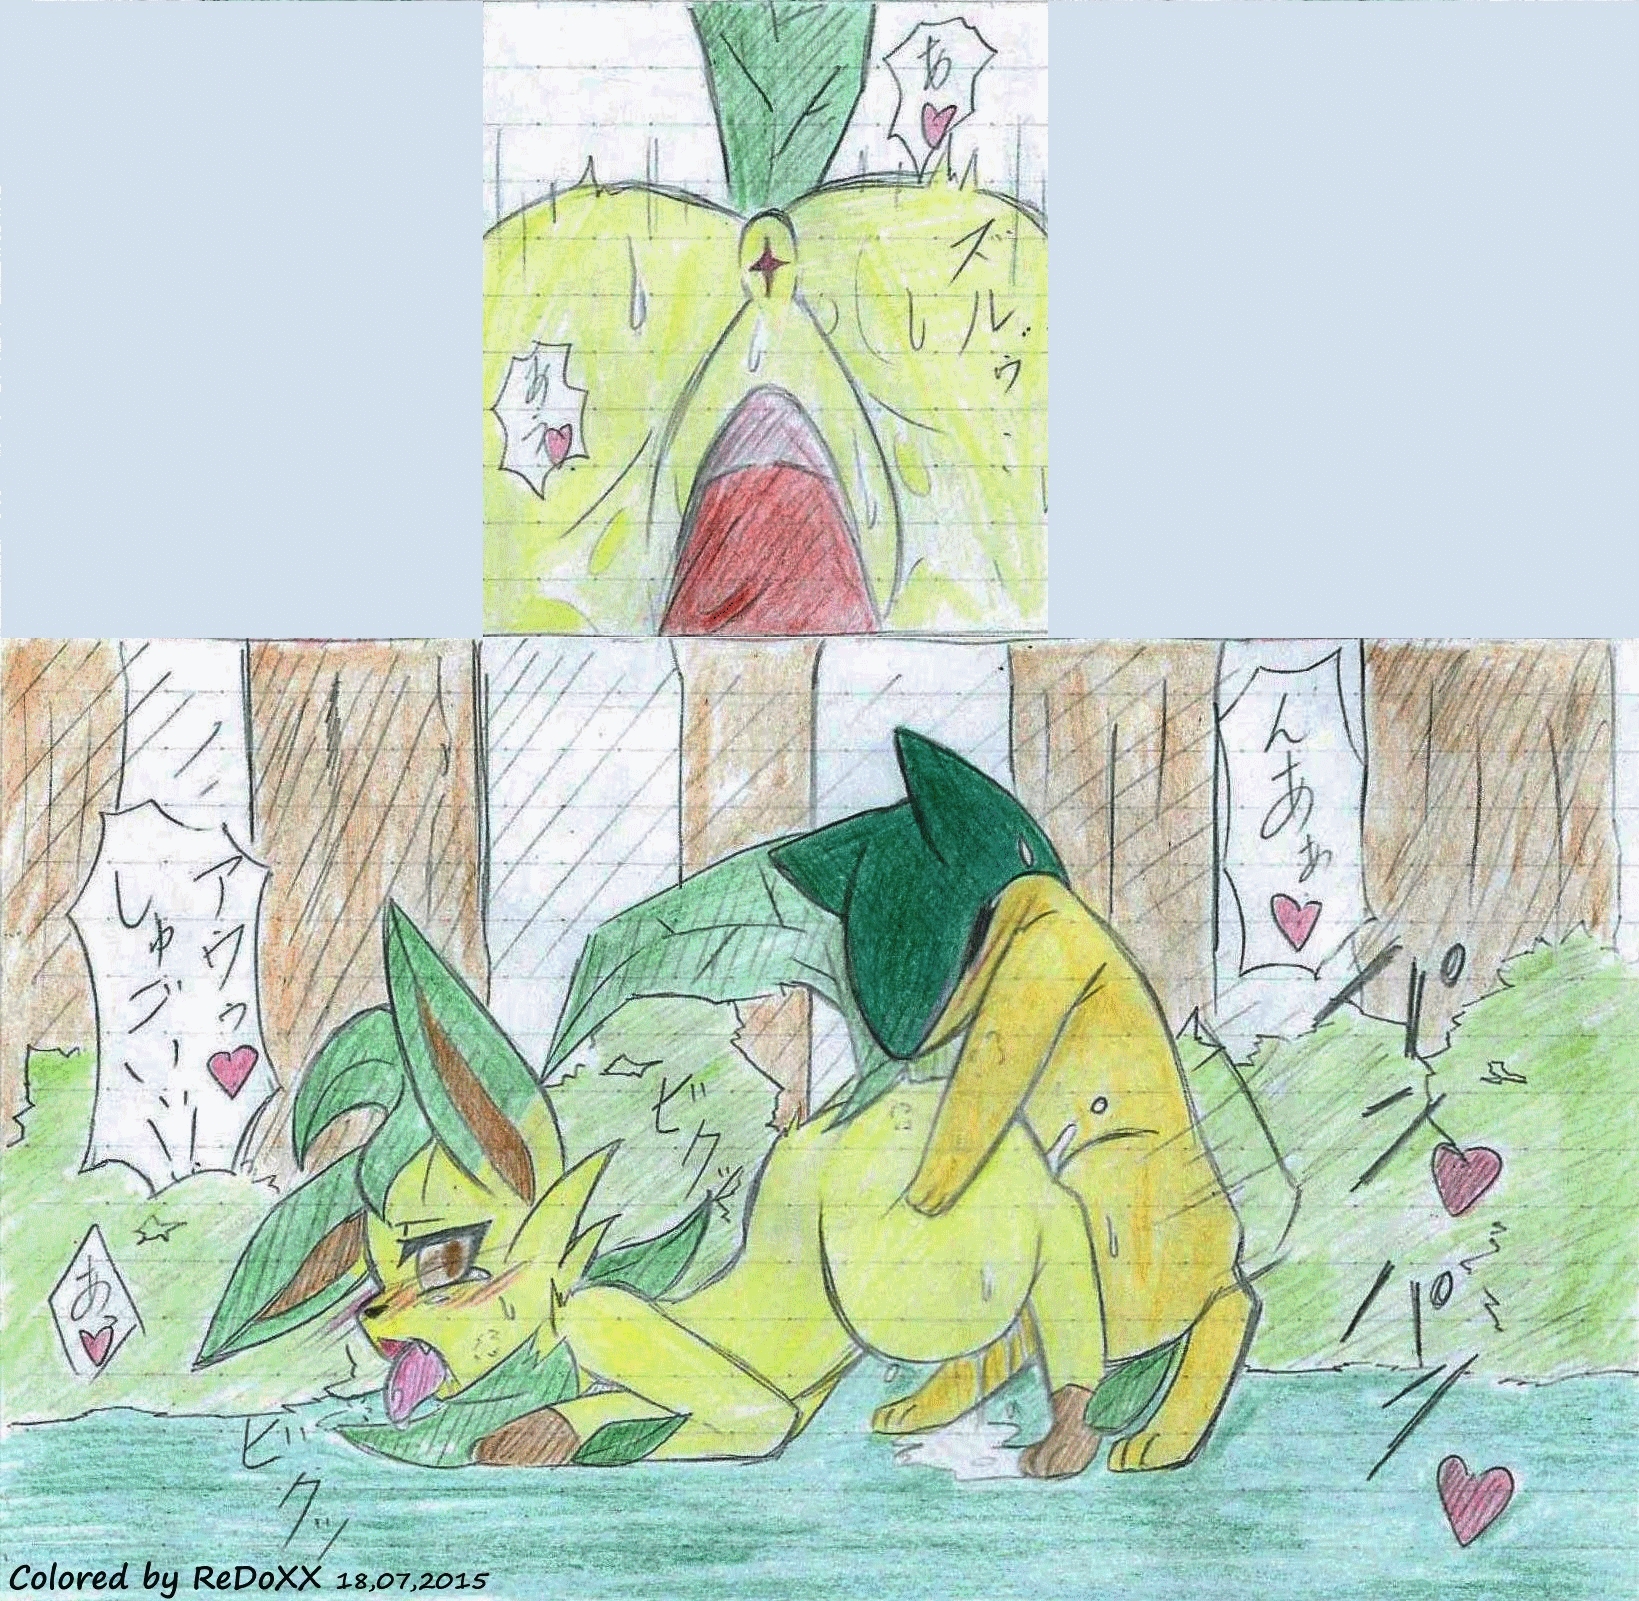 Leafeon X Quilava [Colorized by ReDoXX] 10